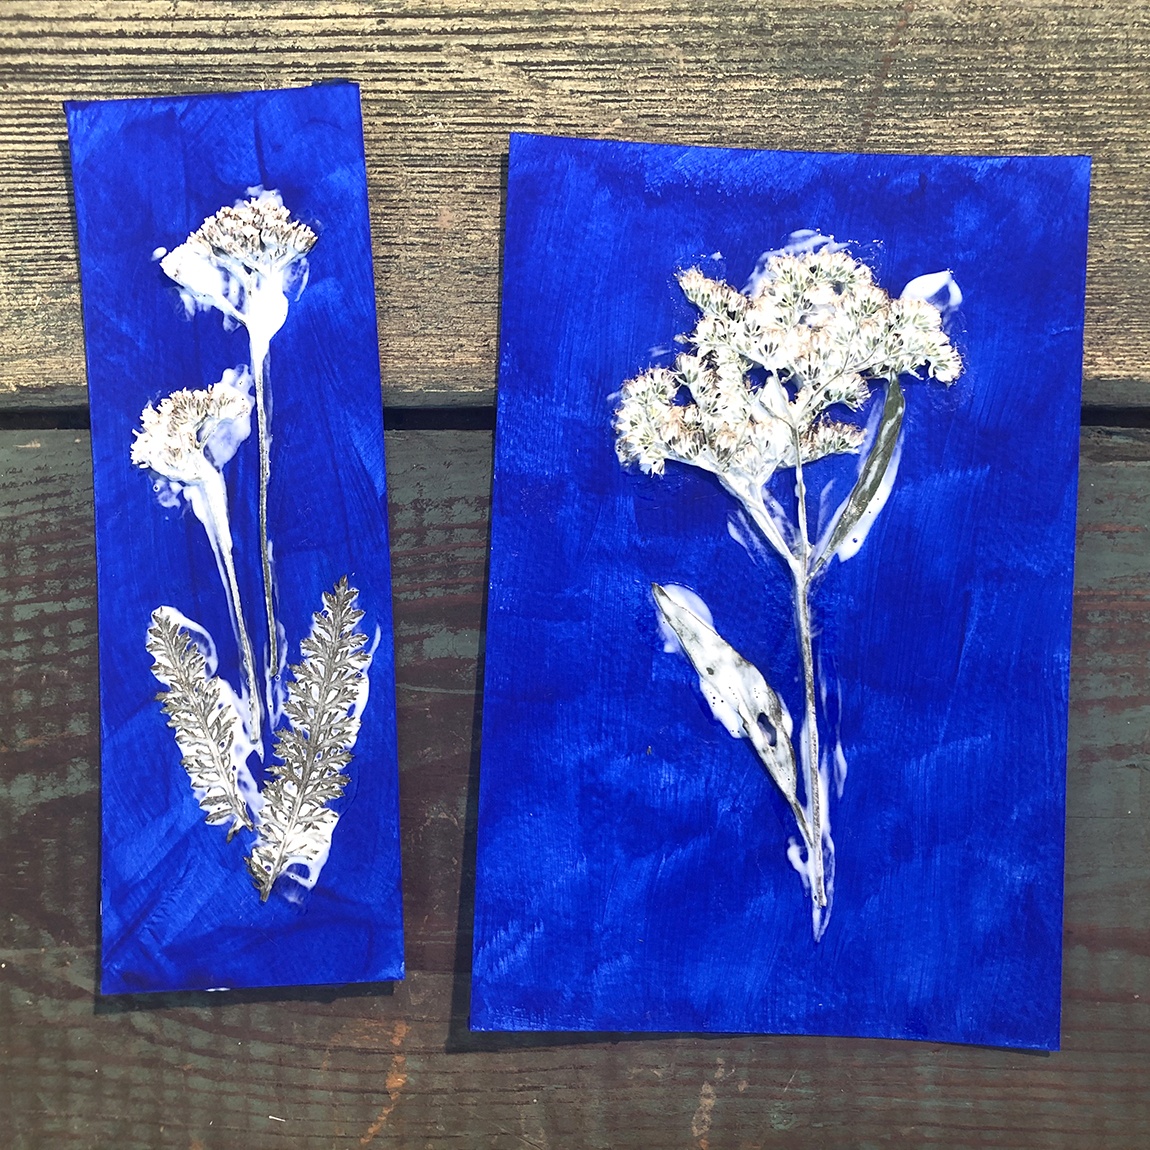 Two ultramarine paper bookmarks with plants covered in glue stuck to them.